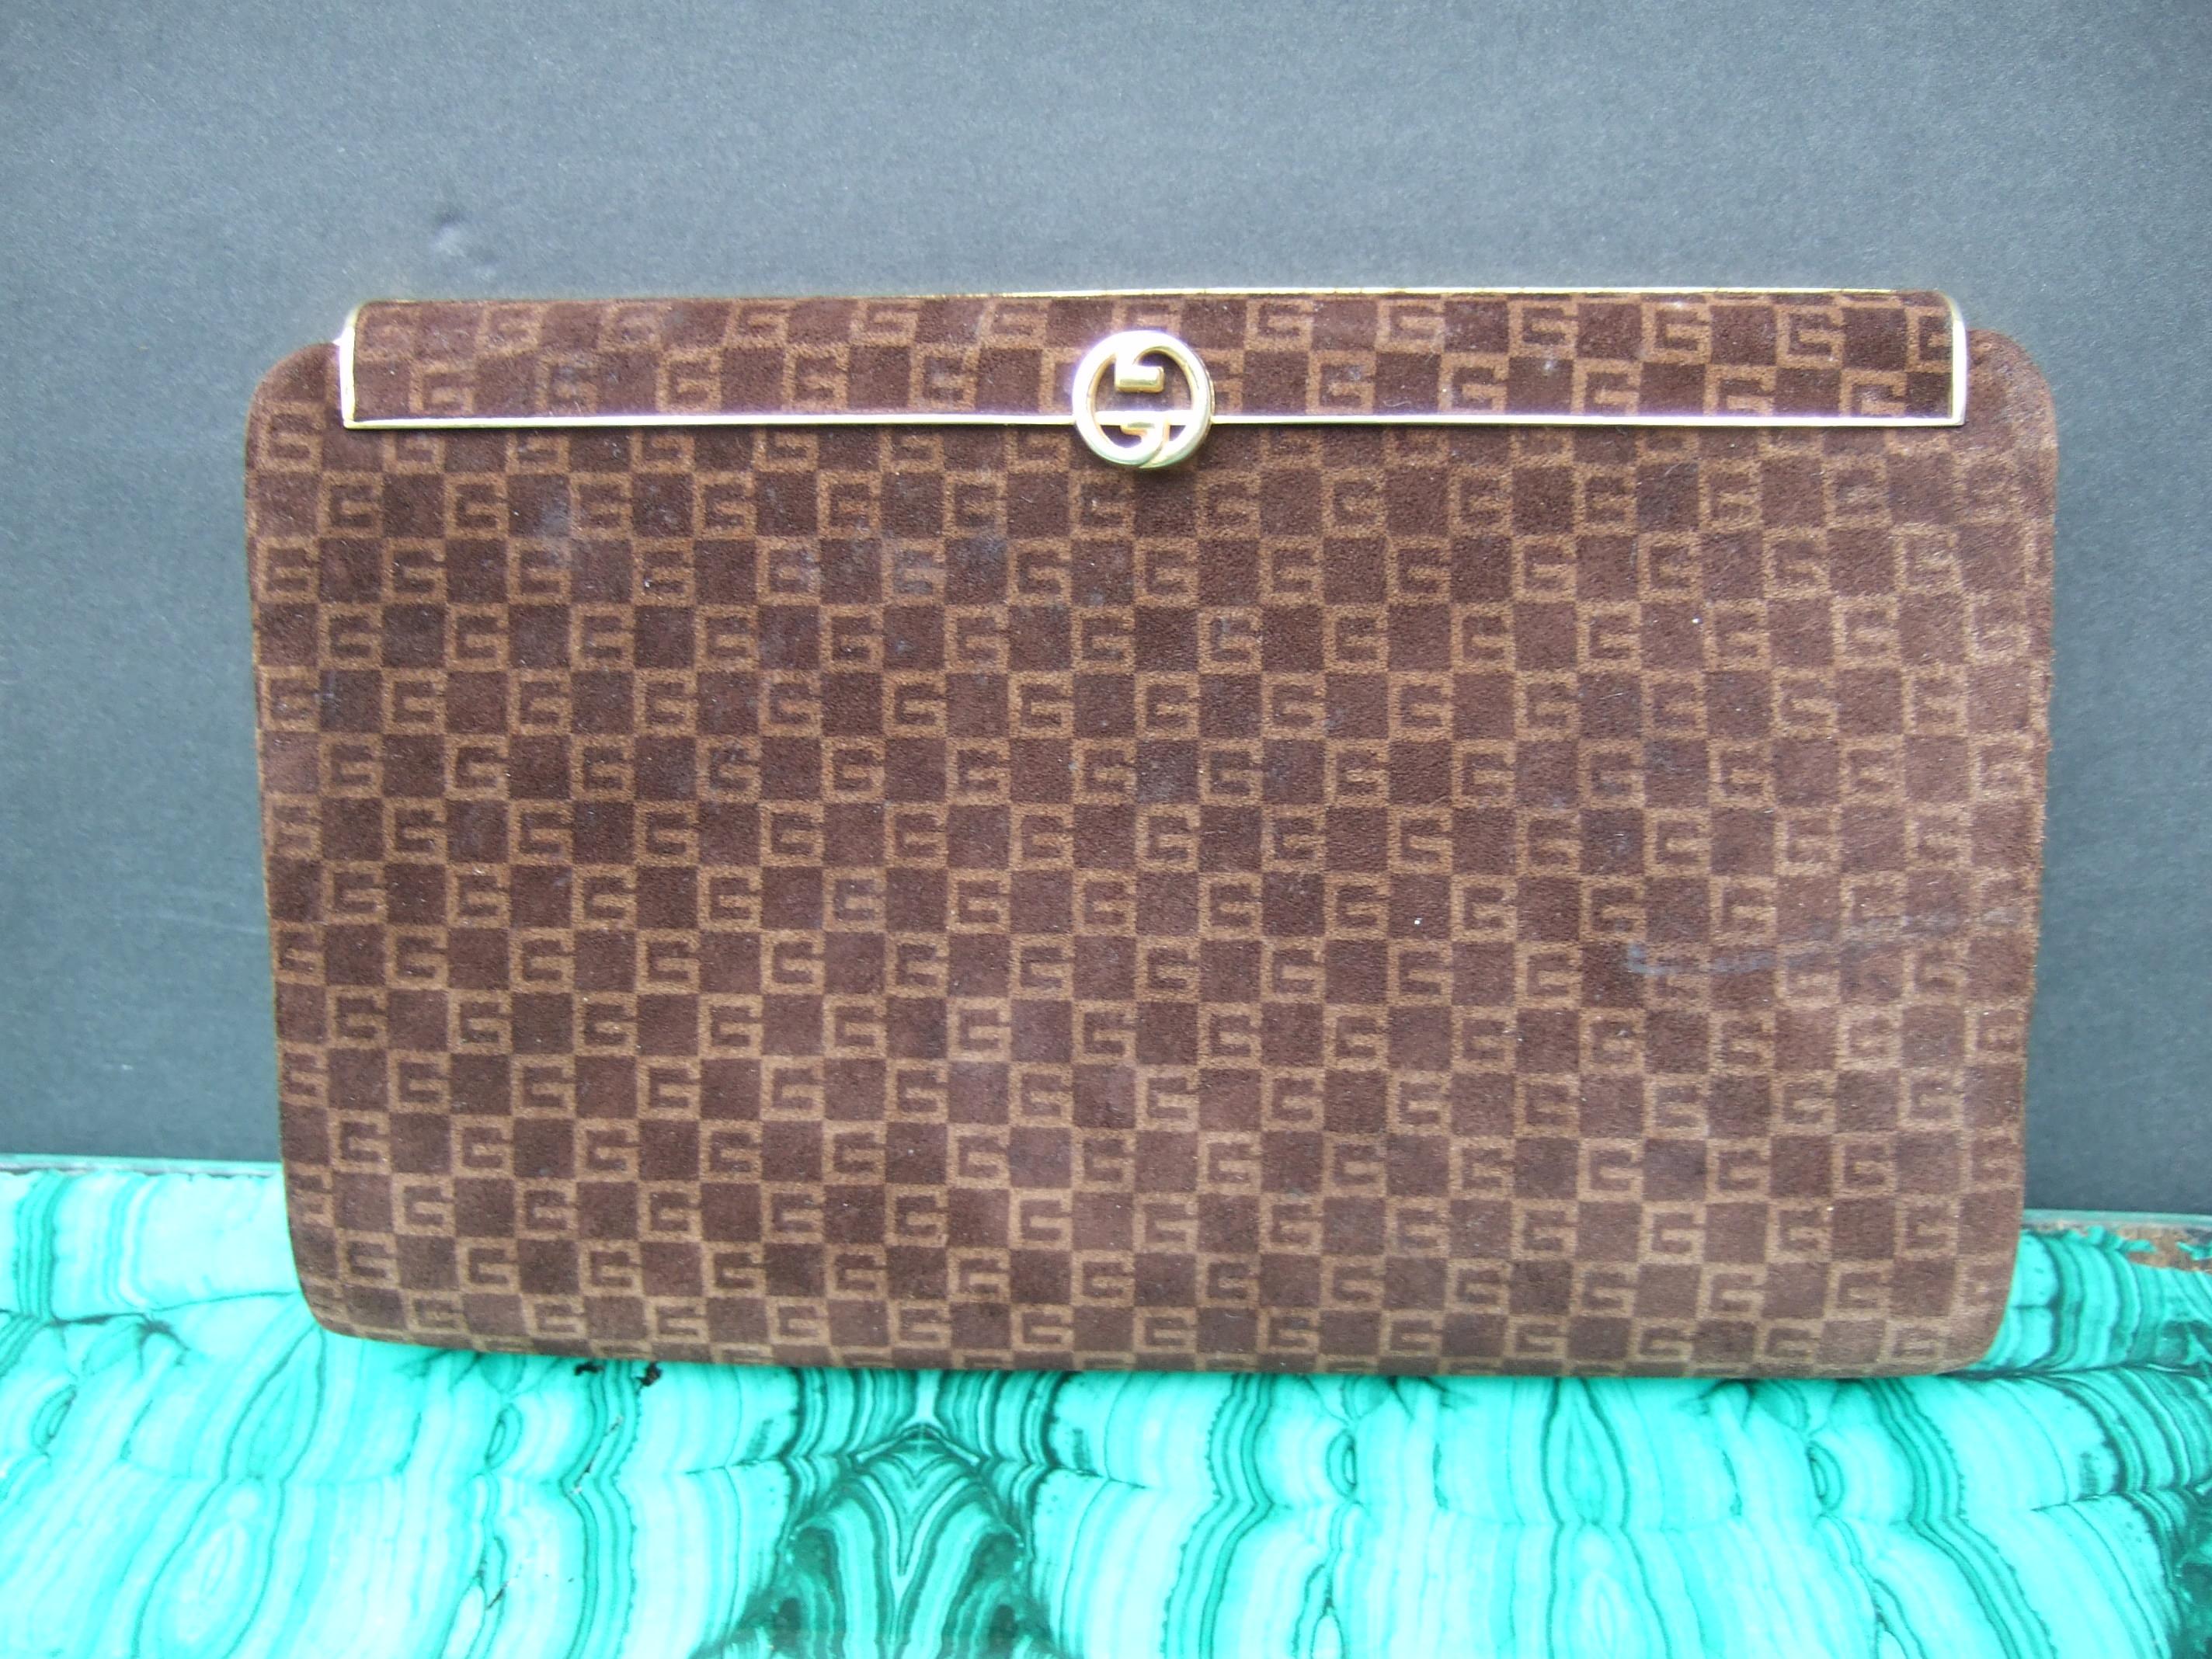 GUCCI Italy Chic brown doeskin suede clutch bag c 1970s 
The brown suede covering is designed with Gucci's subtle 
G initials repeated throughout the front and back exterior
sides in a subtle geometric checkerboard pattern

Adorned with a small gilt